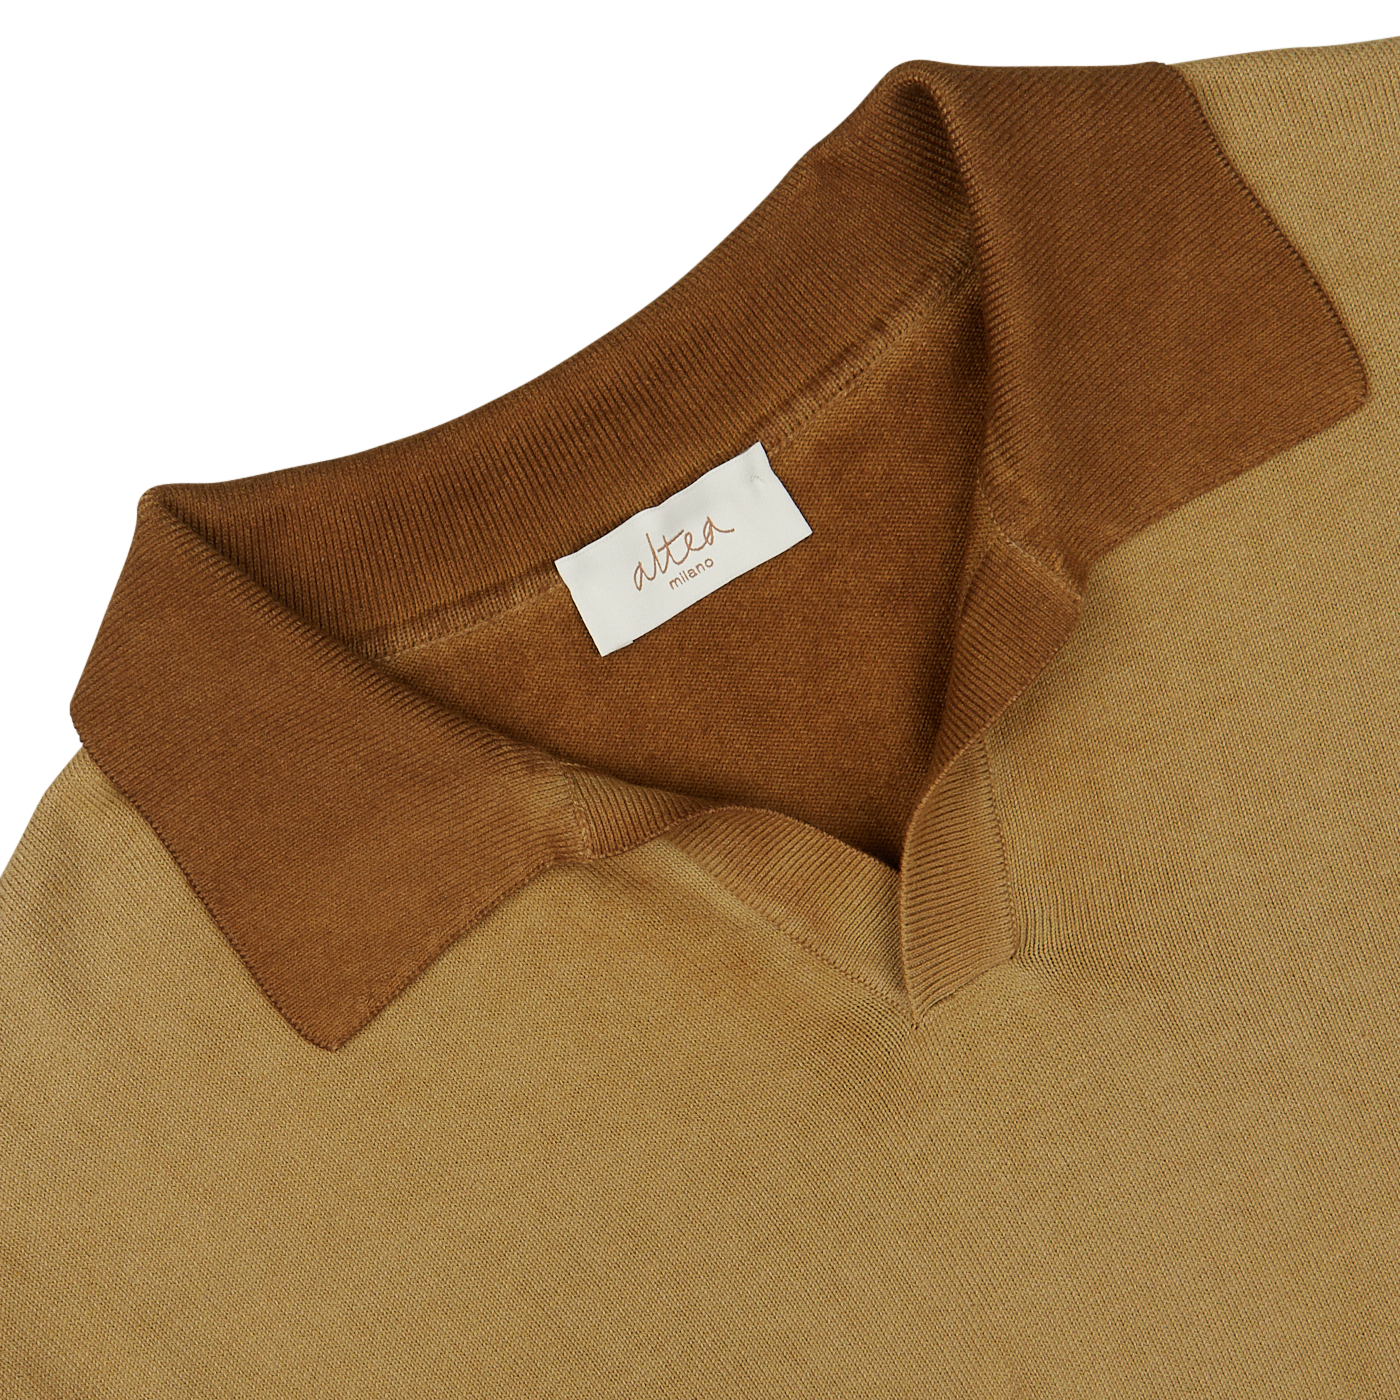 Close-up of a light brown, Altea garment-dyed sweater collar with a white label.